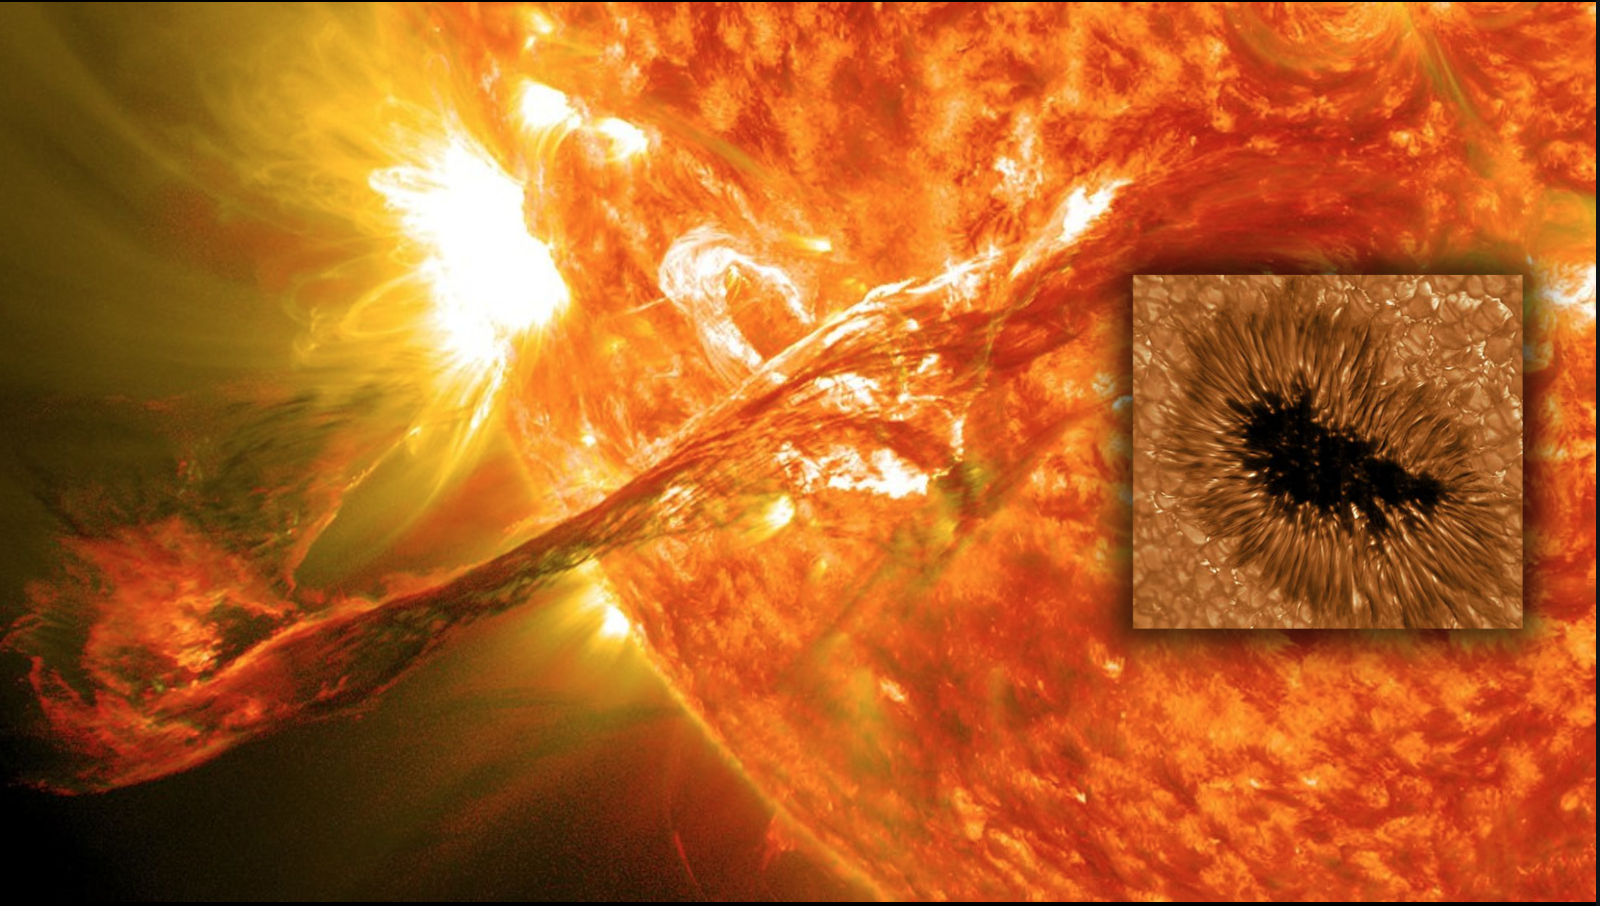 Planet-Sized Sunspot Has Grown 10-Times In Just A Few Days, And It's Aimed Right at Earth